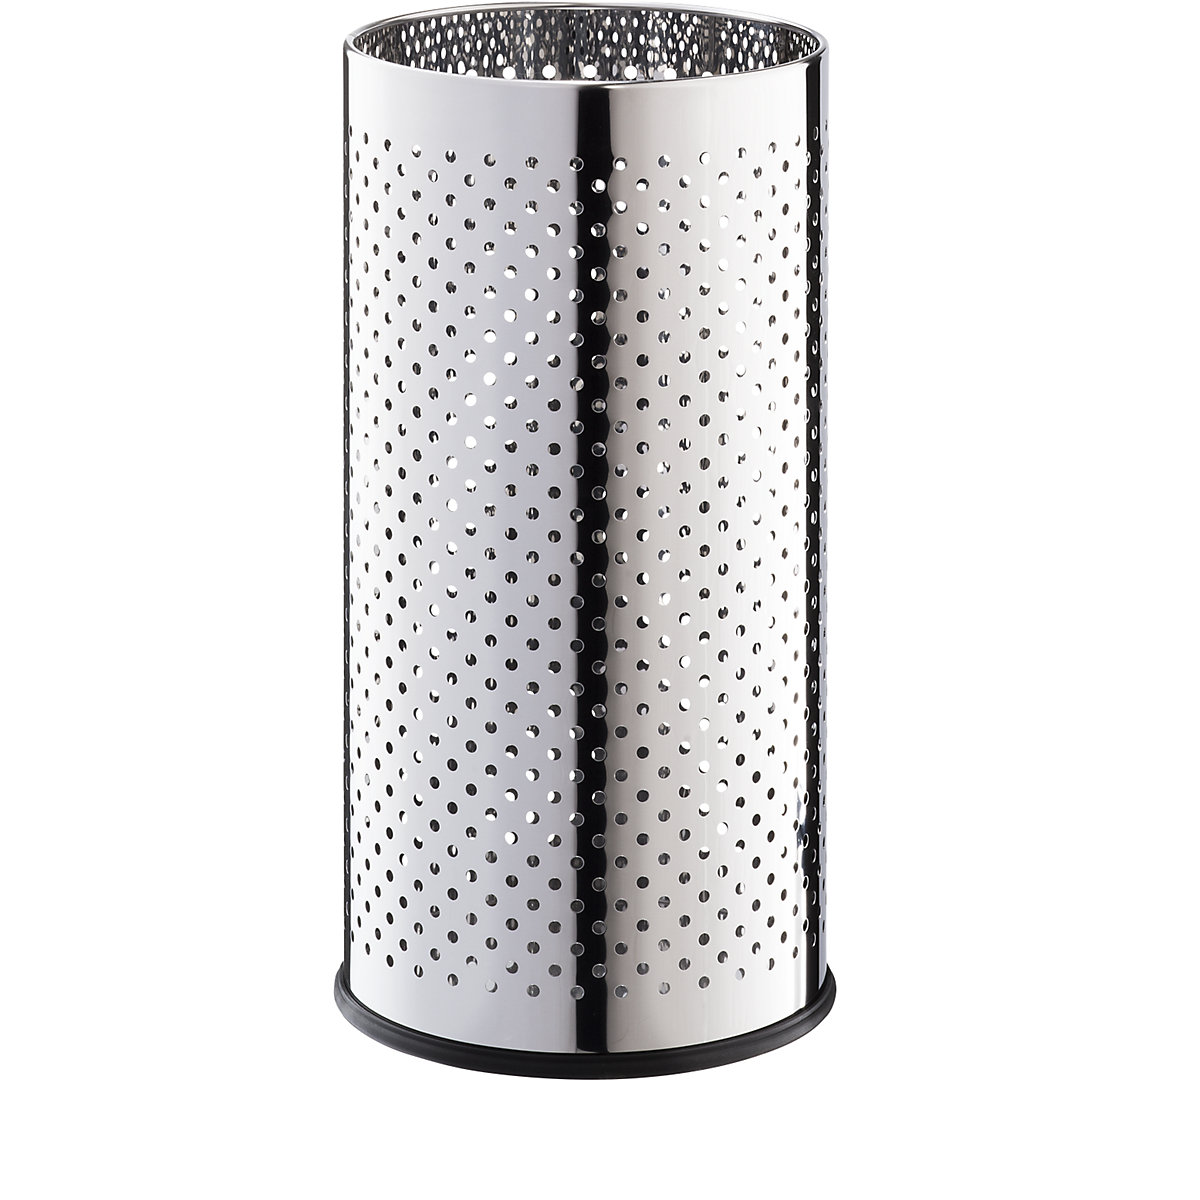 Stainless steel umbrella stand - helit